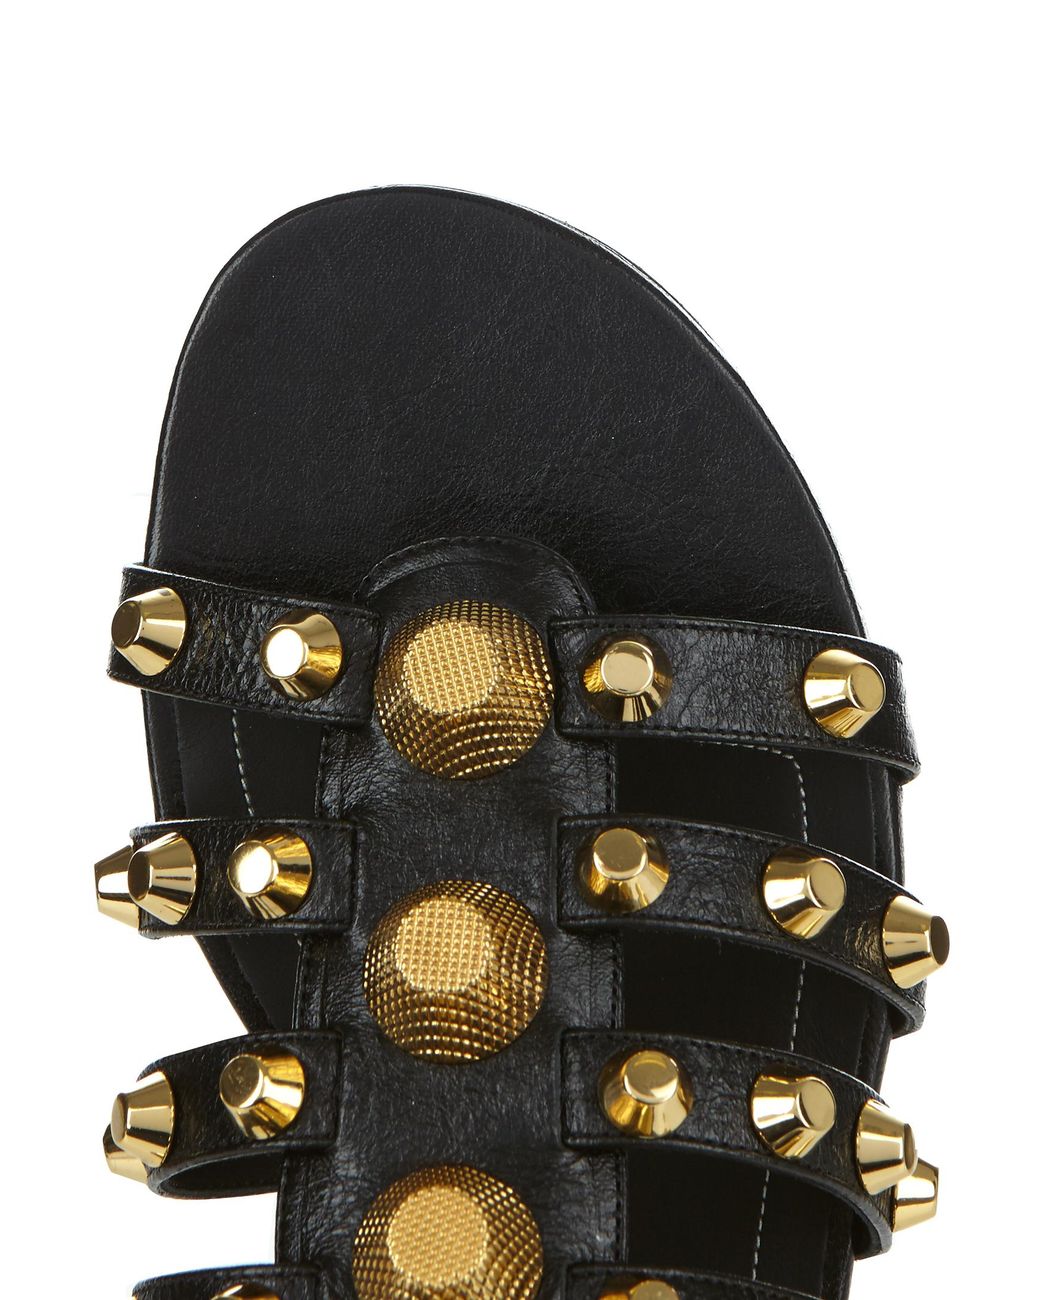 Balenciaga Giant Studded Leather Gladiator Sandals in Black | Lyst